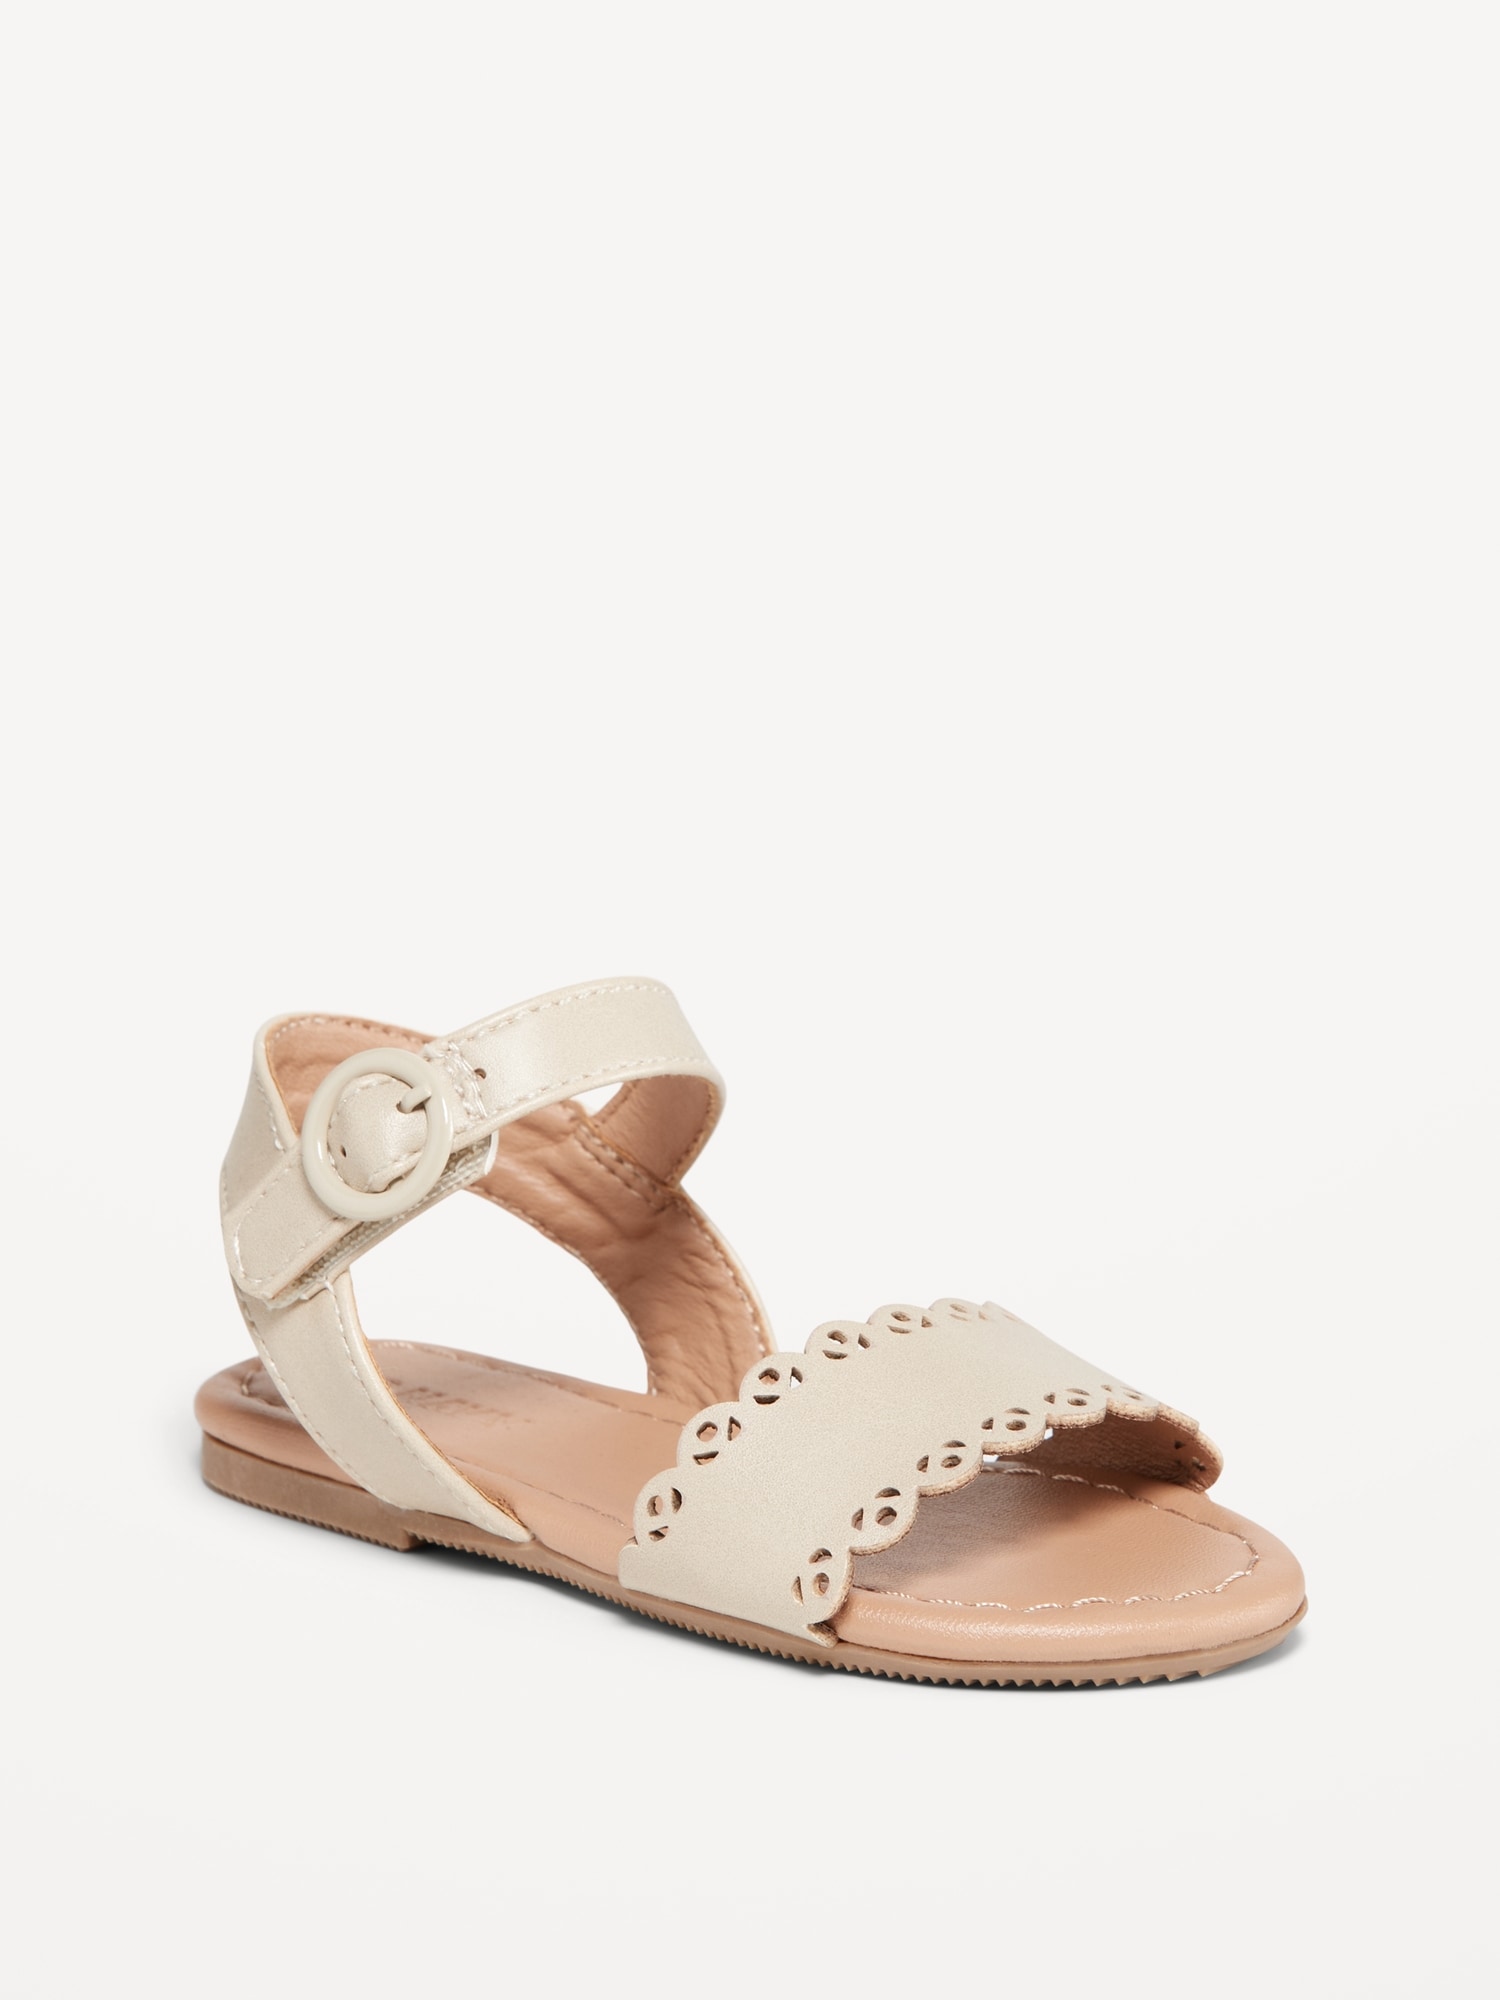 Faux-Leather Scallop-Trim Sandals for Toddler Girls